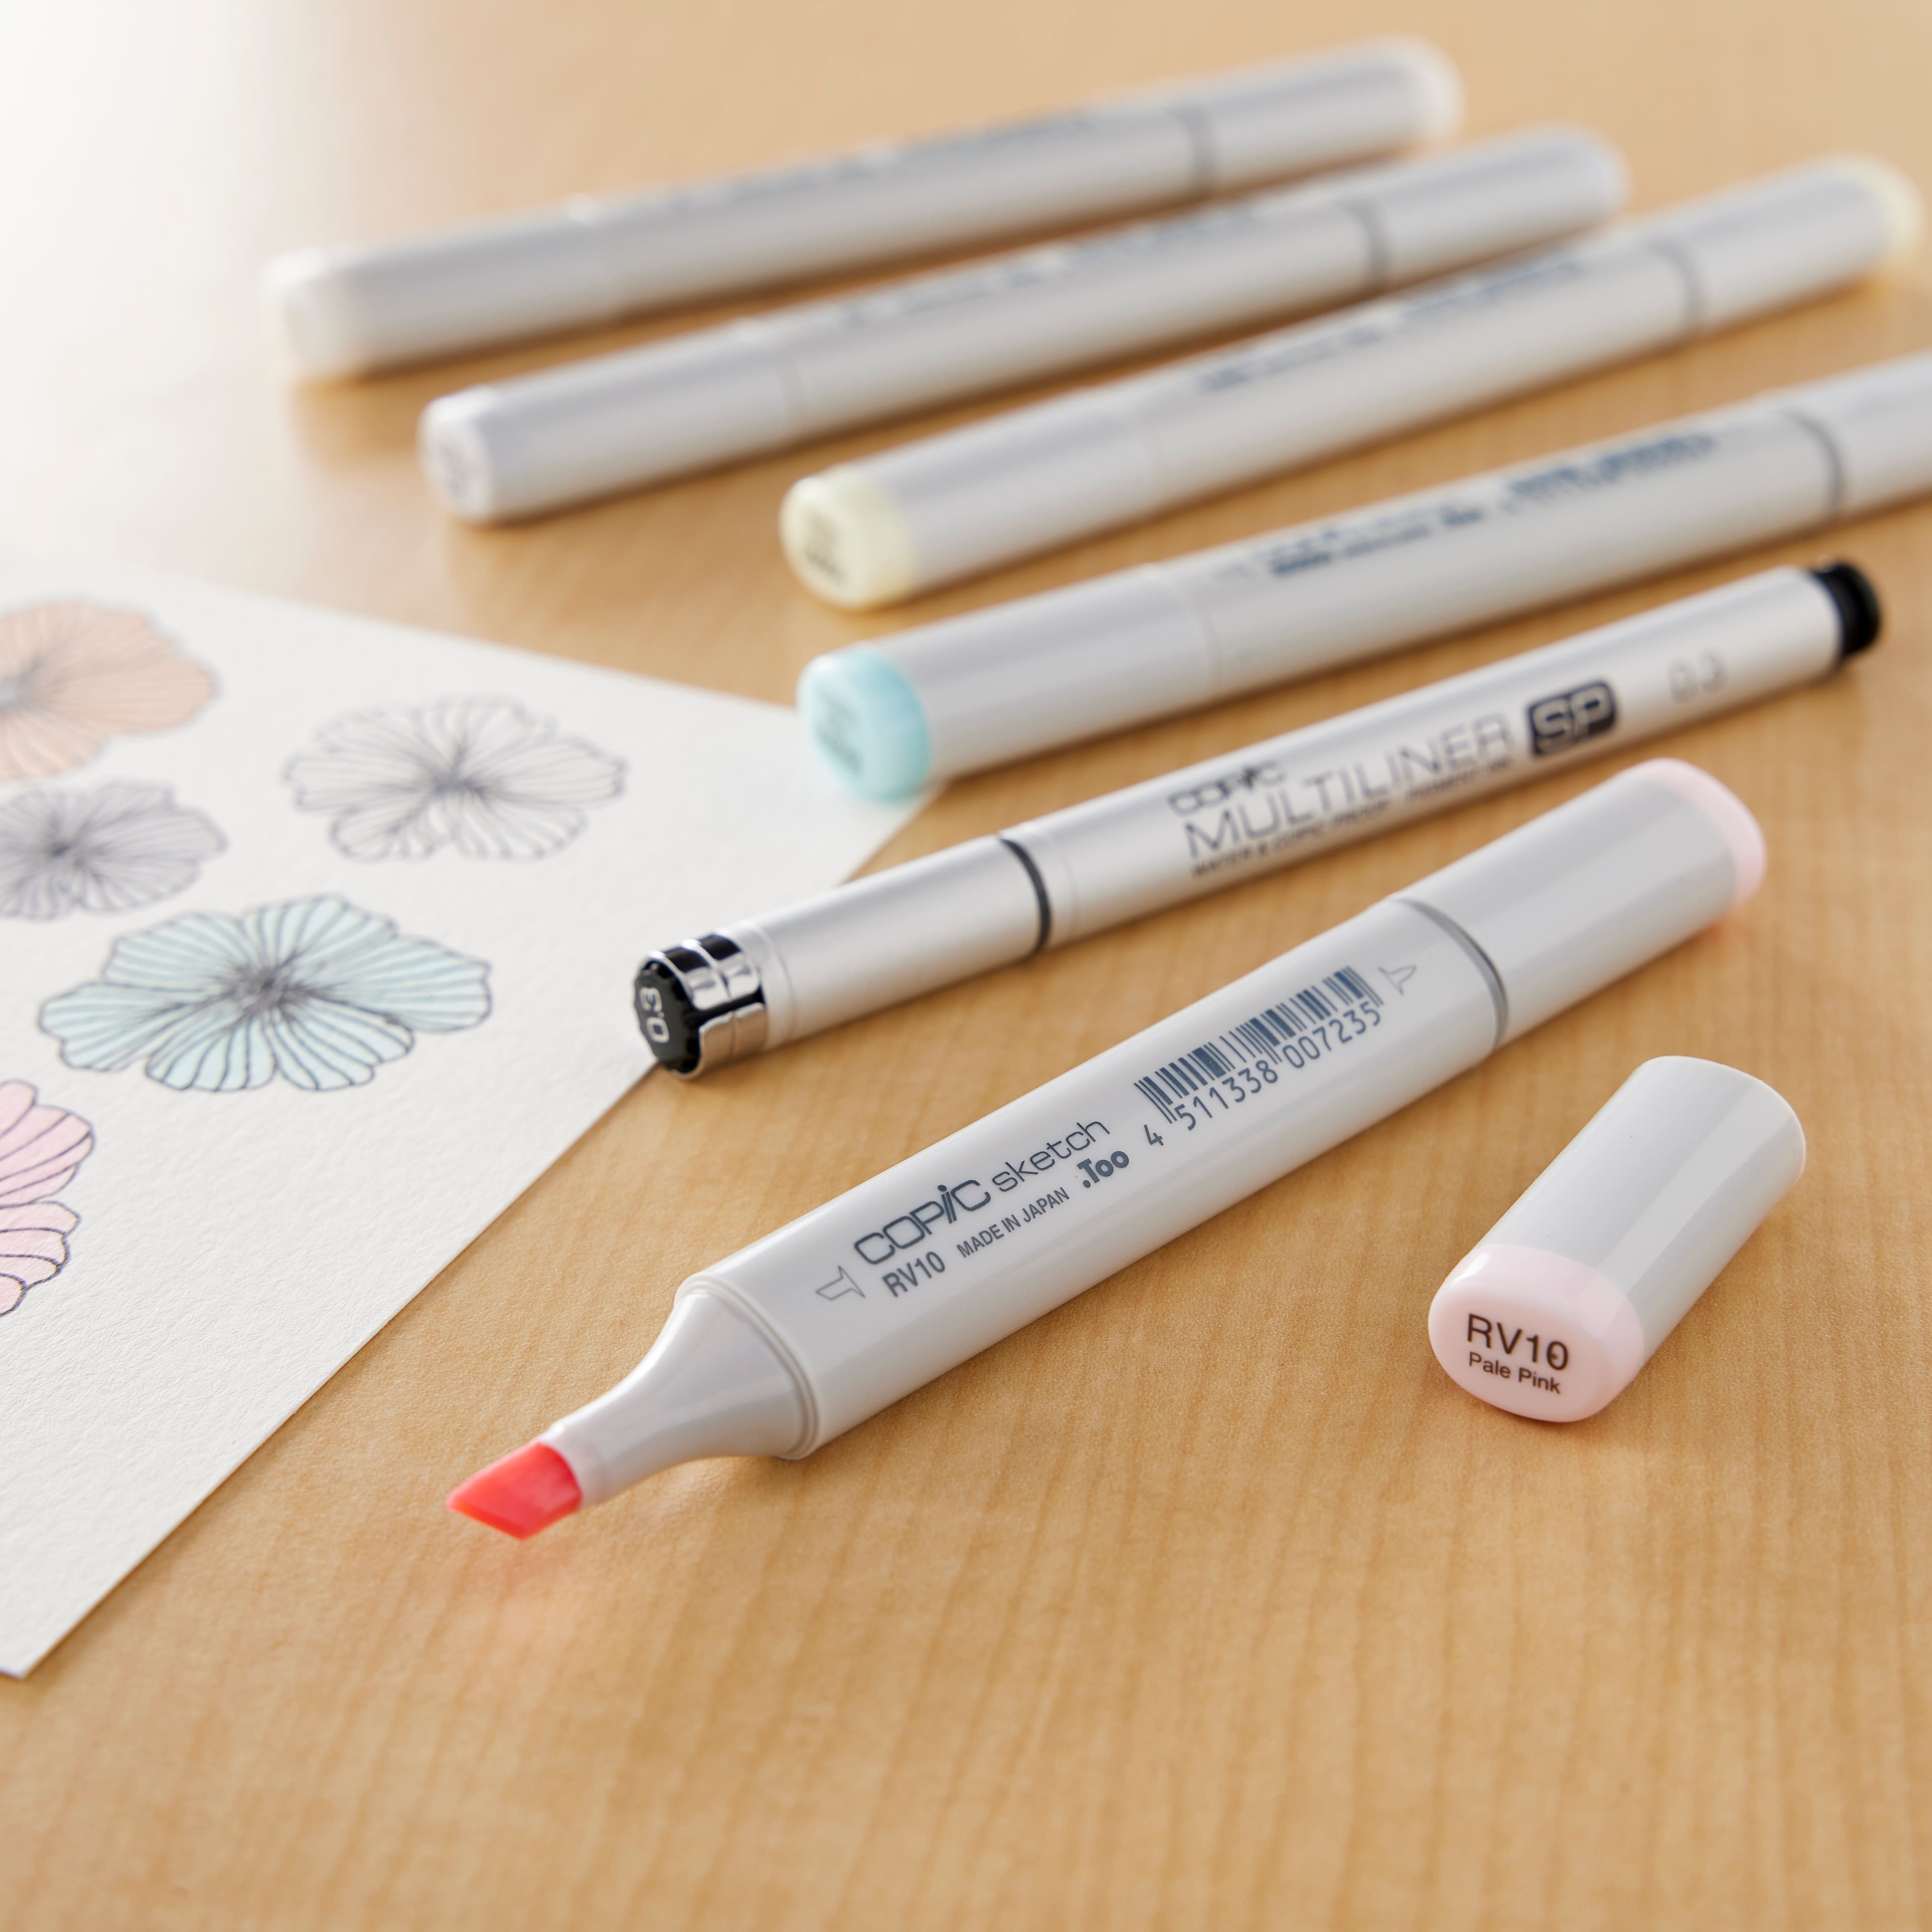 Copic Sketch 6 pc Marker Set, Floral Favorites 1, Dual-Tipped